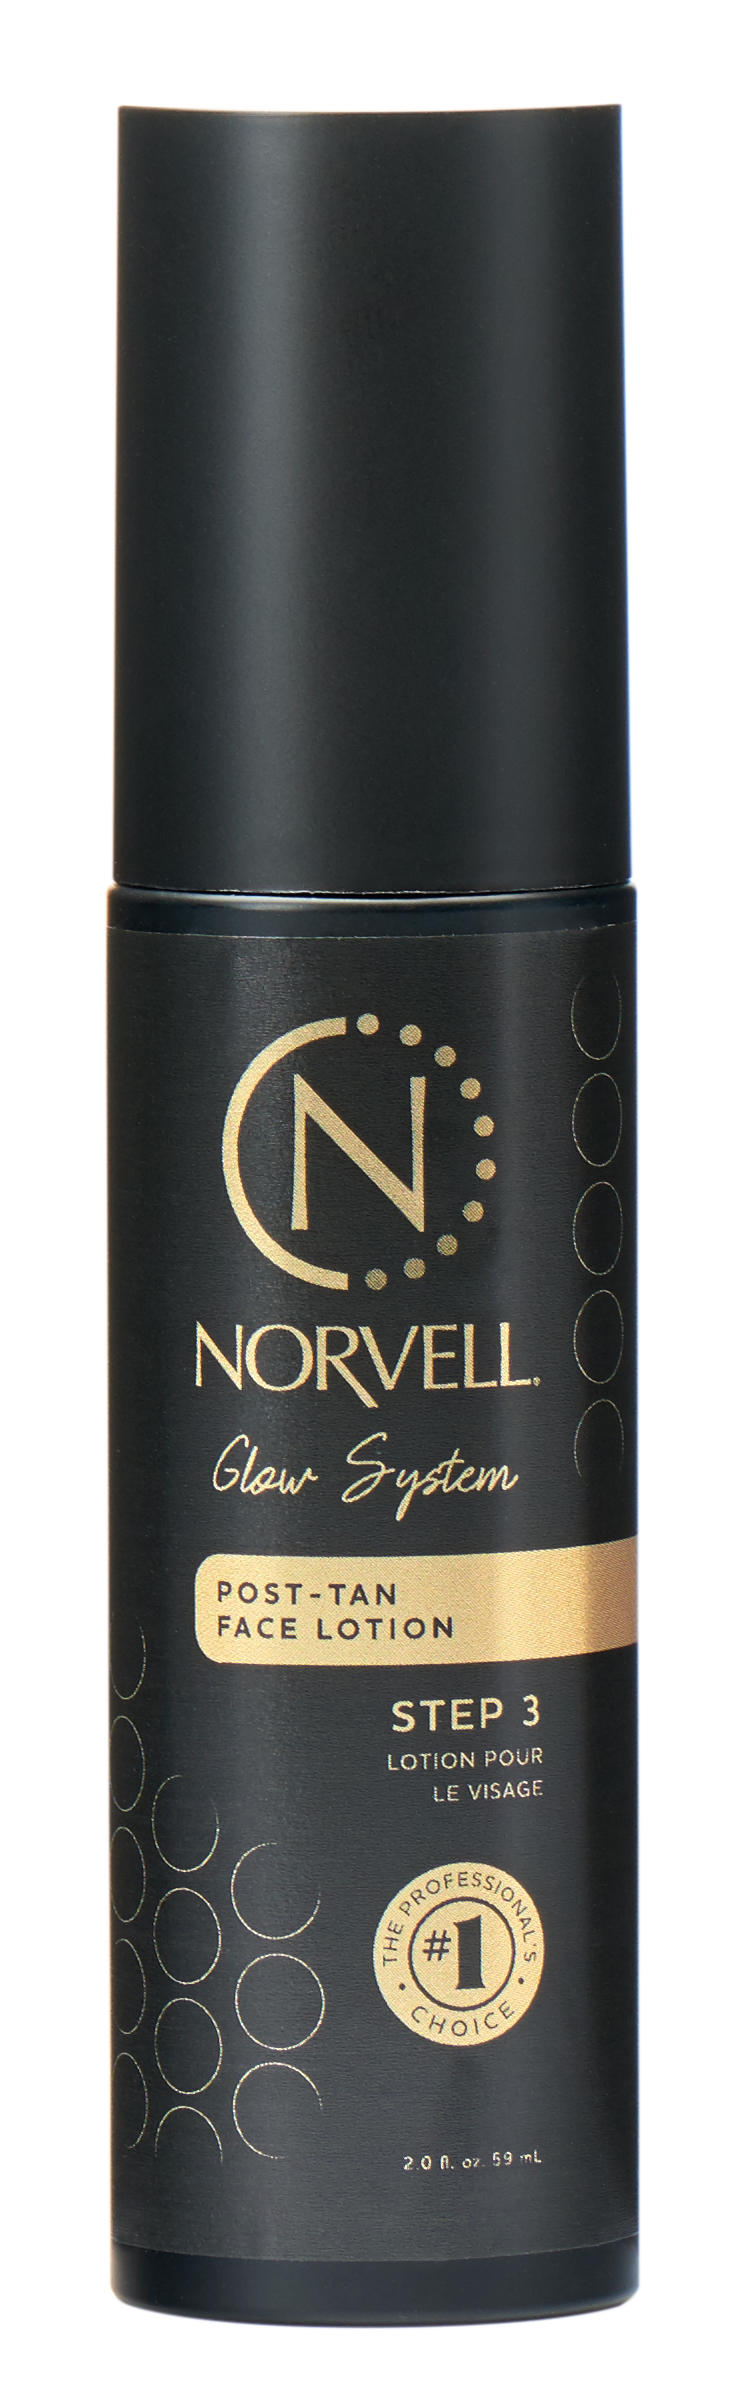 2 oz. bottle of norvell post tan face lotion